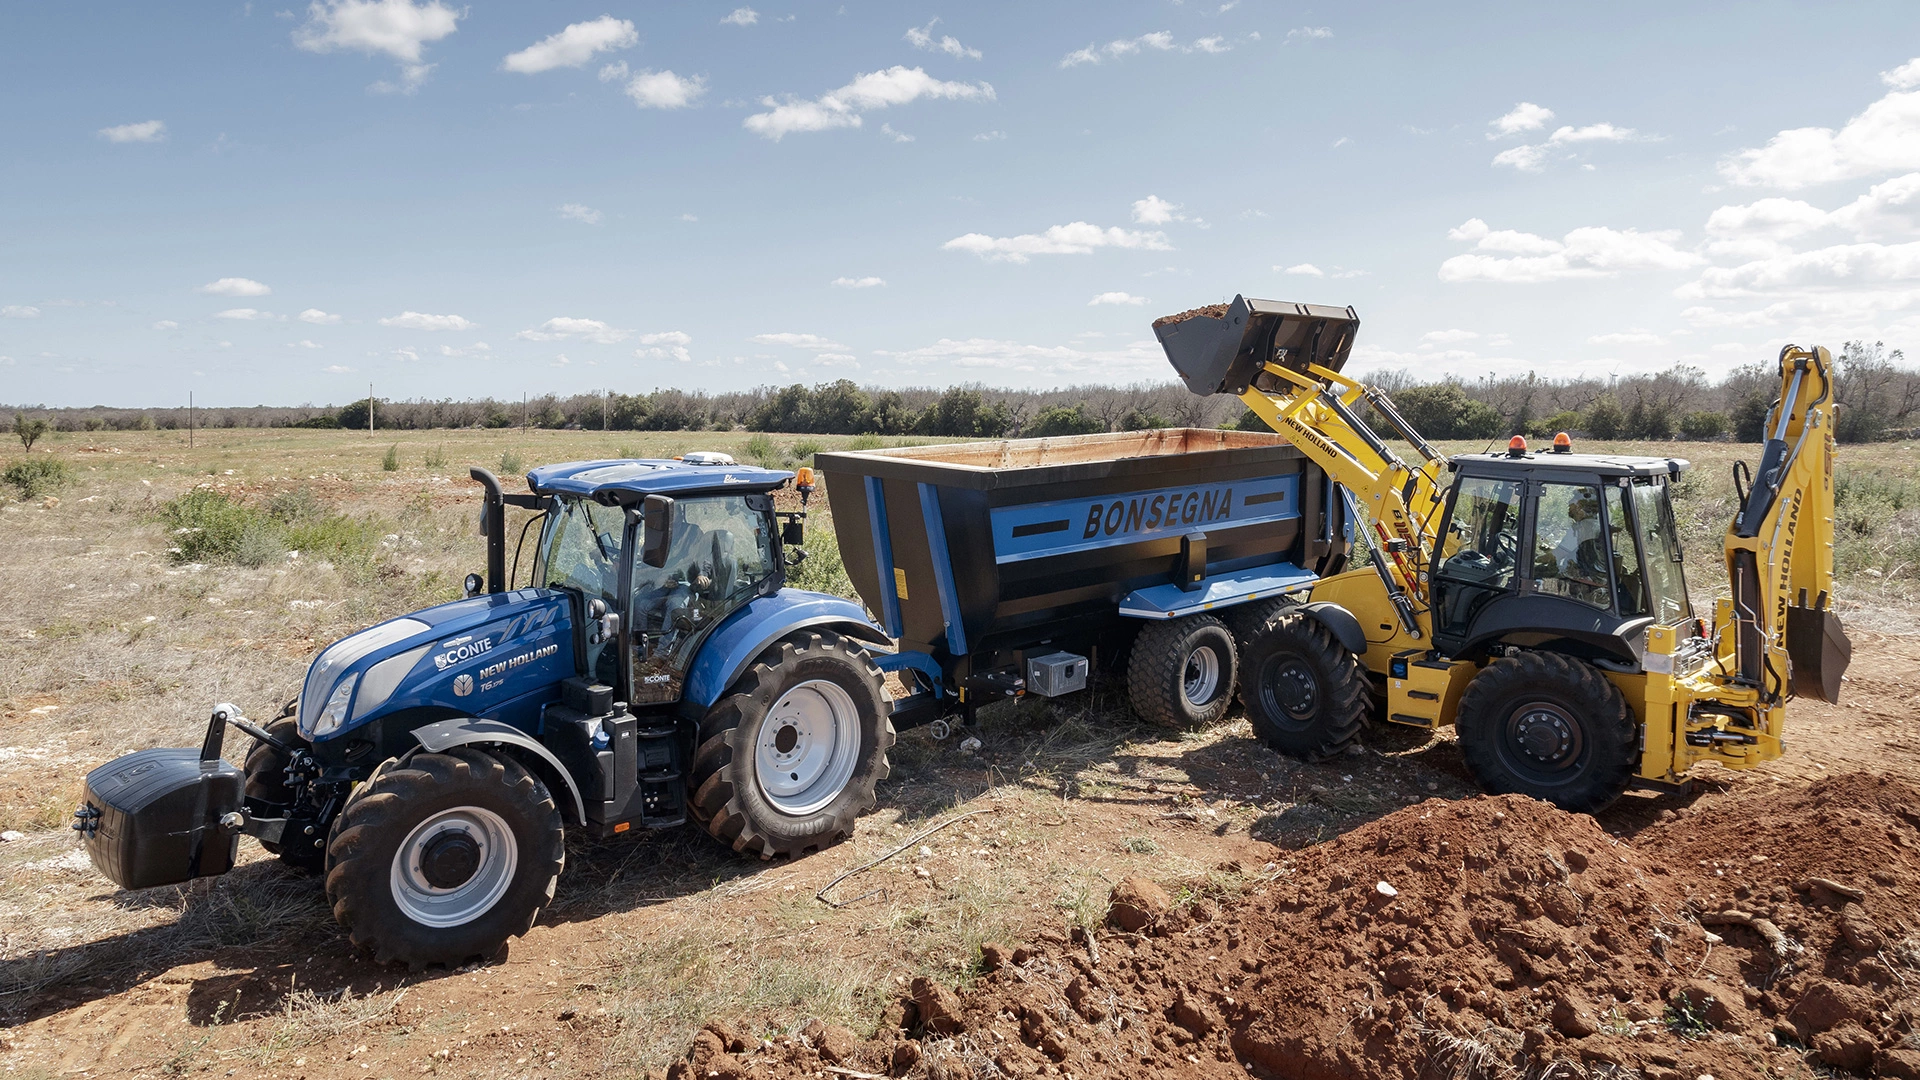 New Holland tractor & backhoe at work, loading soil into a trailer on a clear field day.